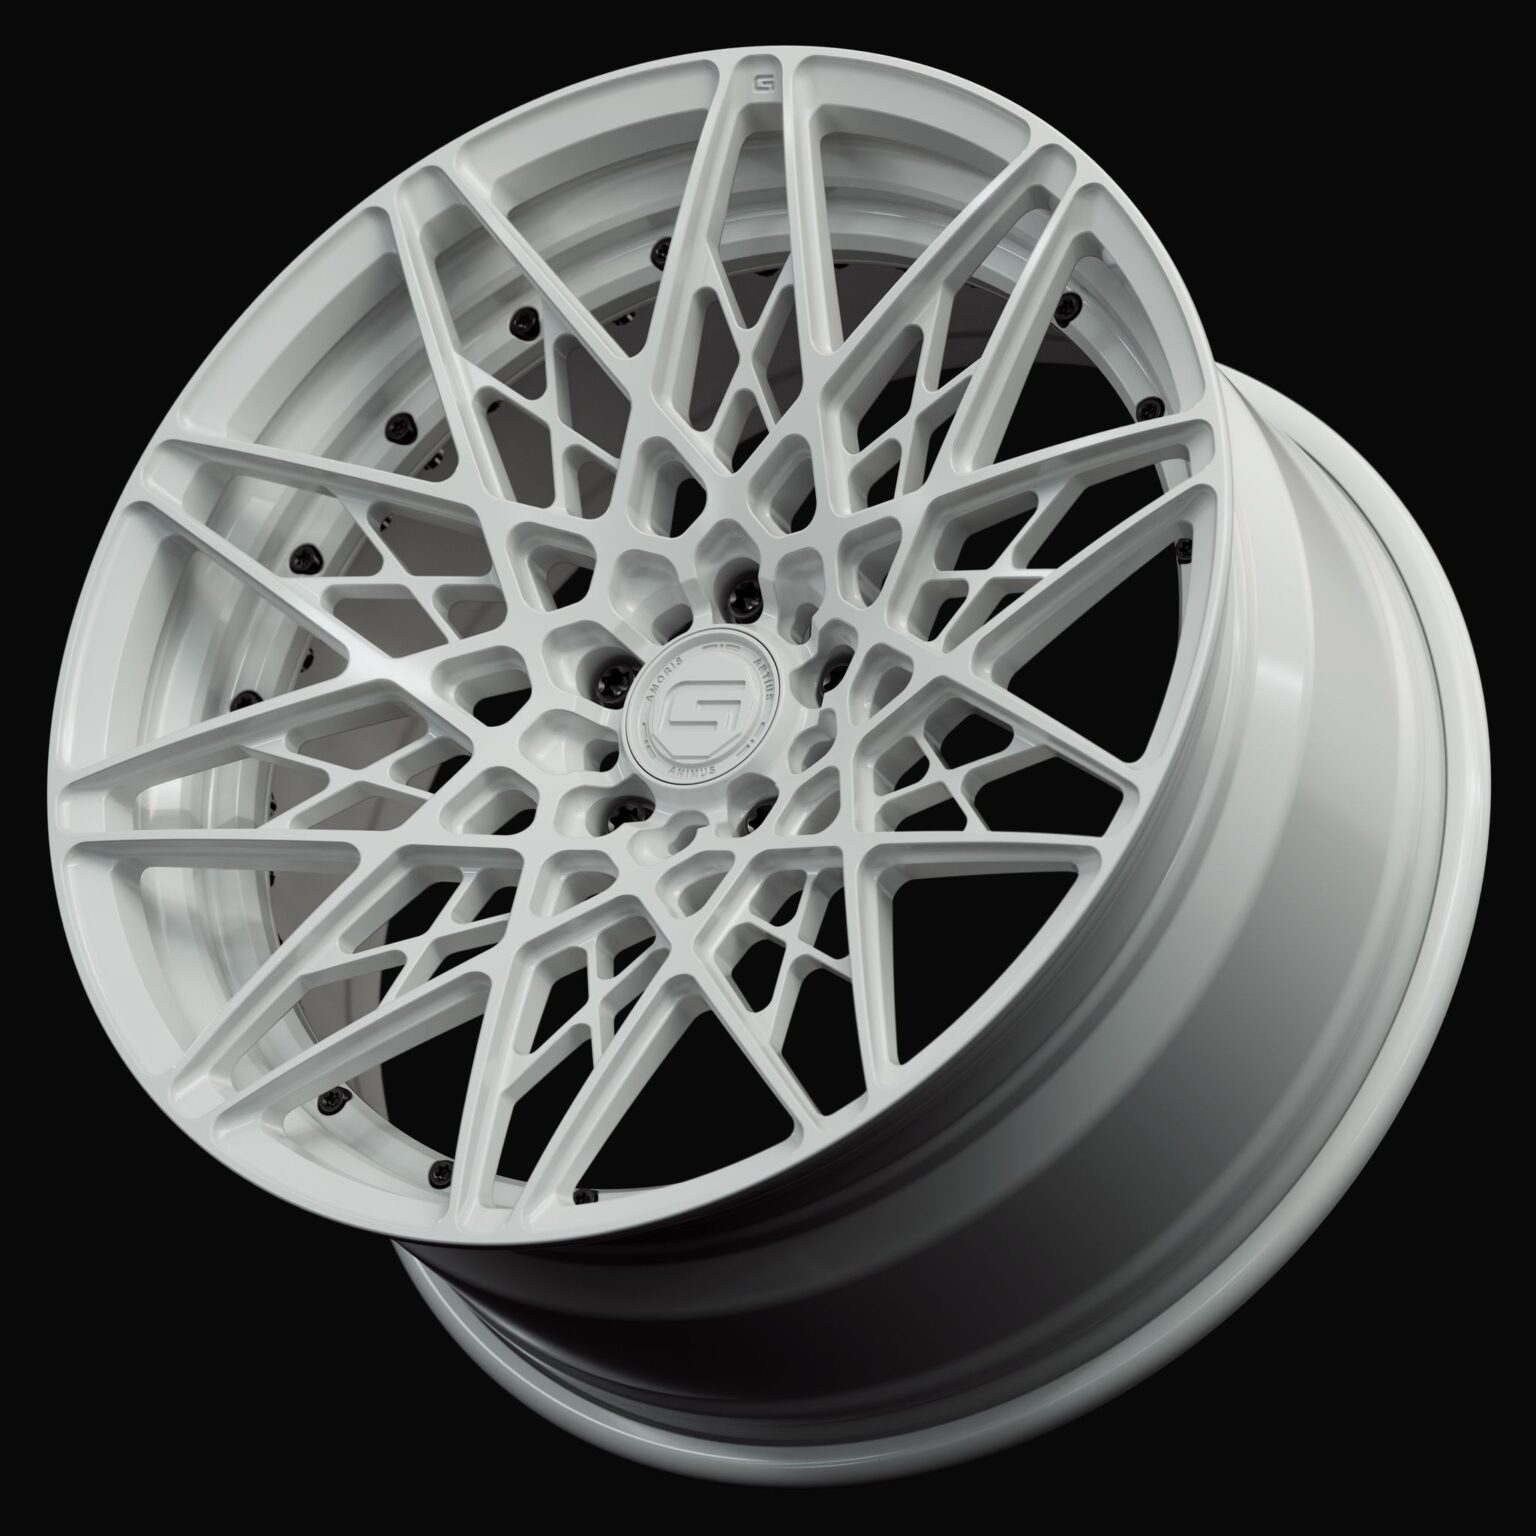 Three-quarter view of a white G54 duoblock wheel from Govad Forged Track series